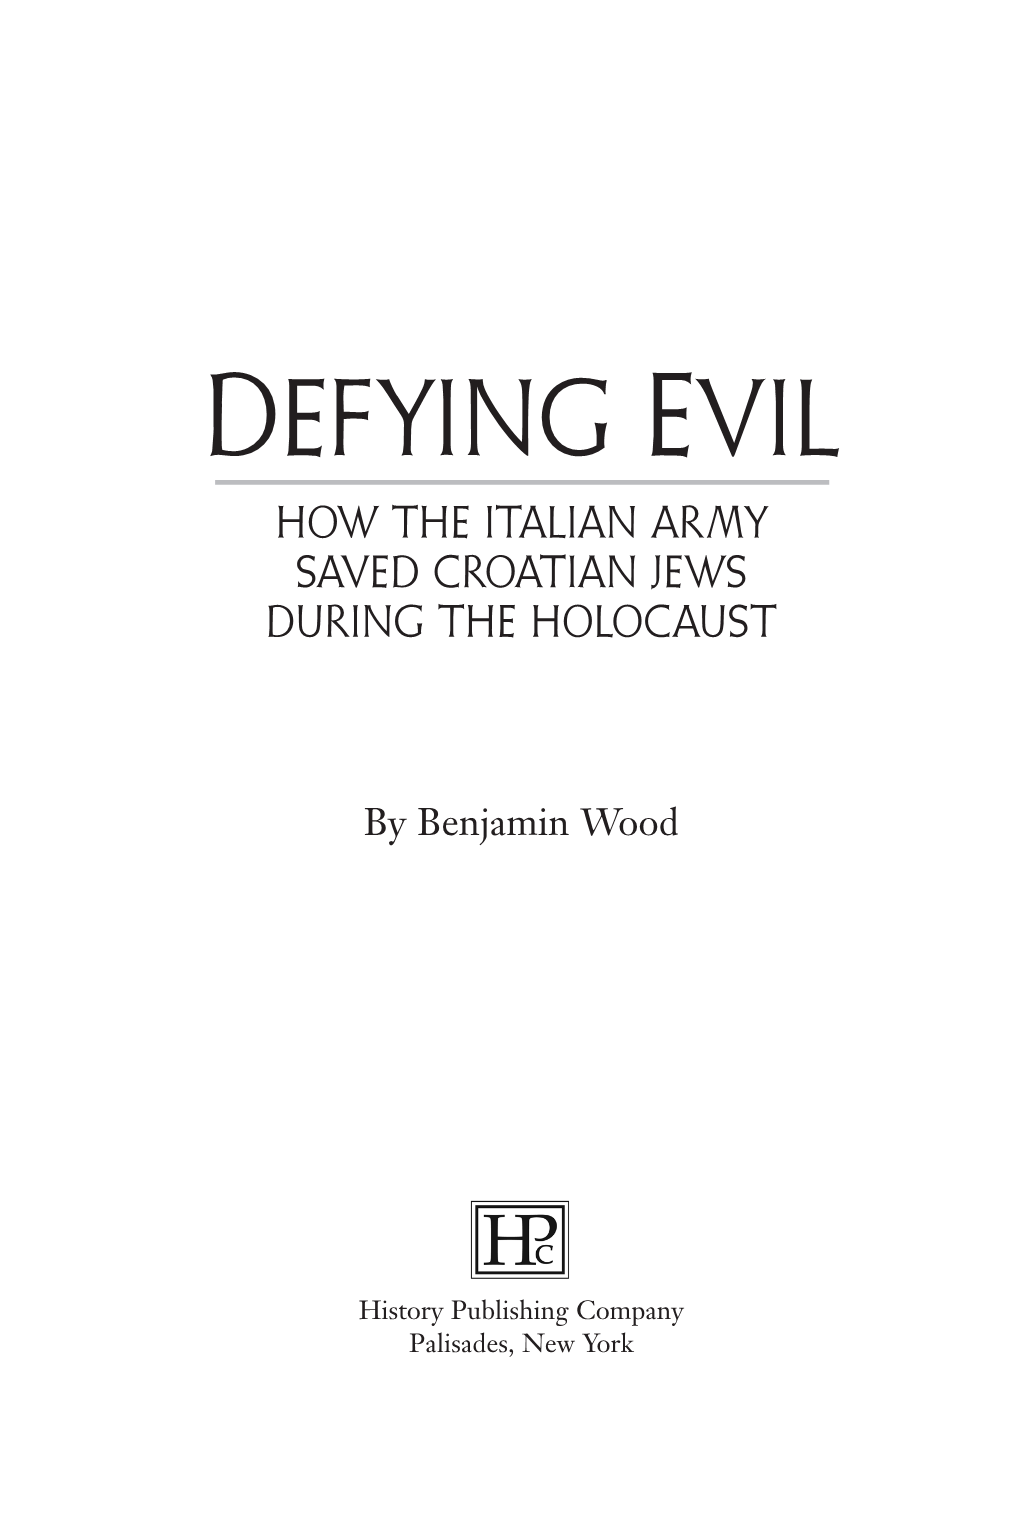 Defying Evil How the Italian Army Saved Croatian Jews During the Holocaust